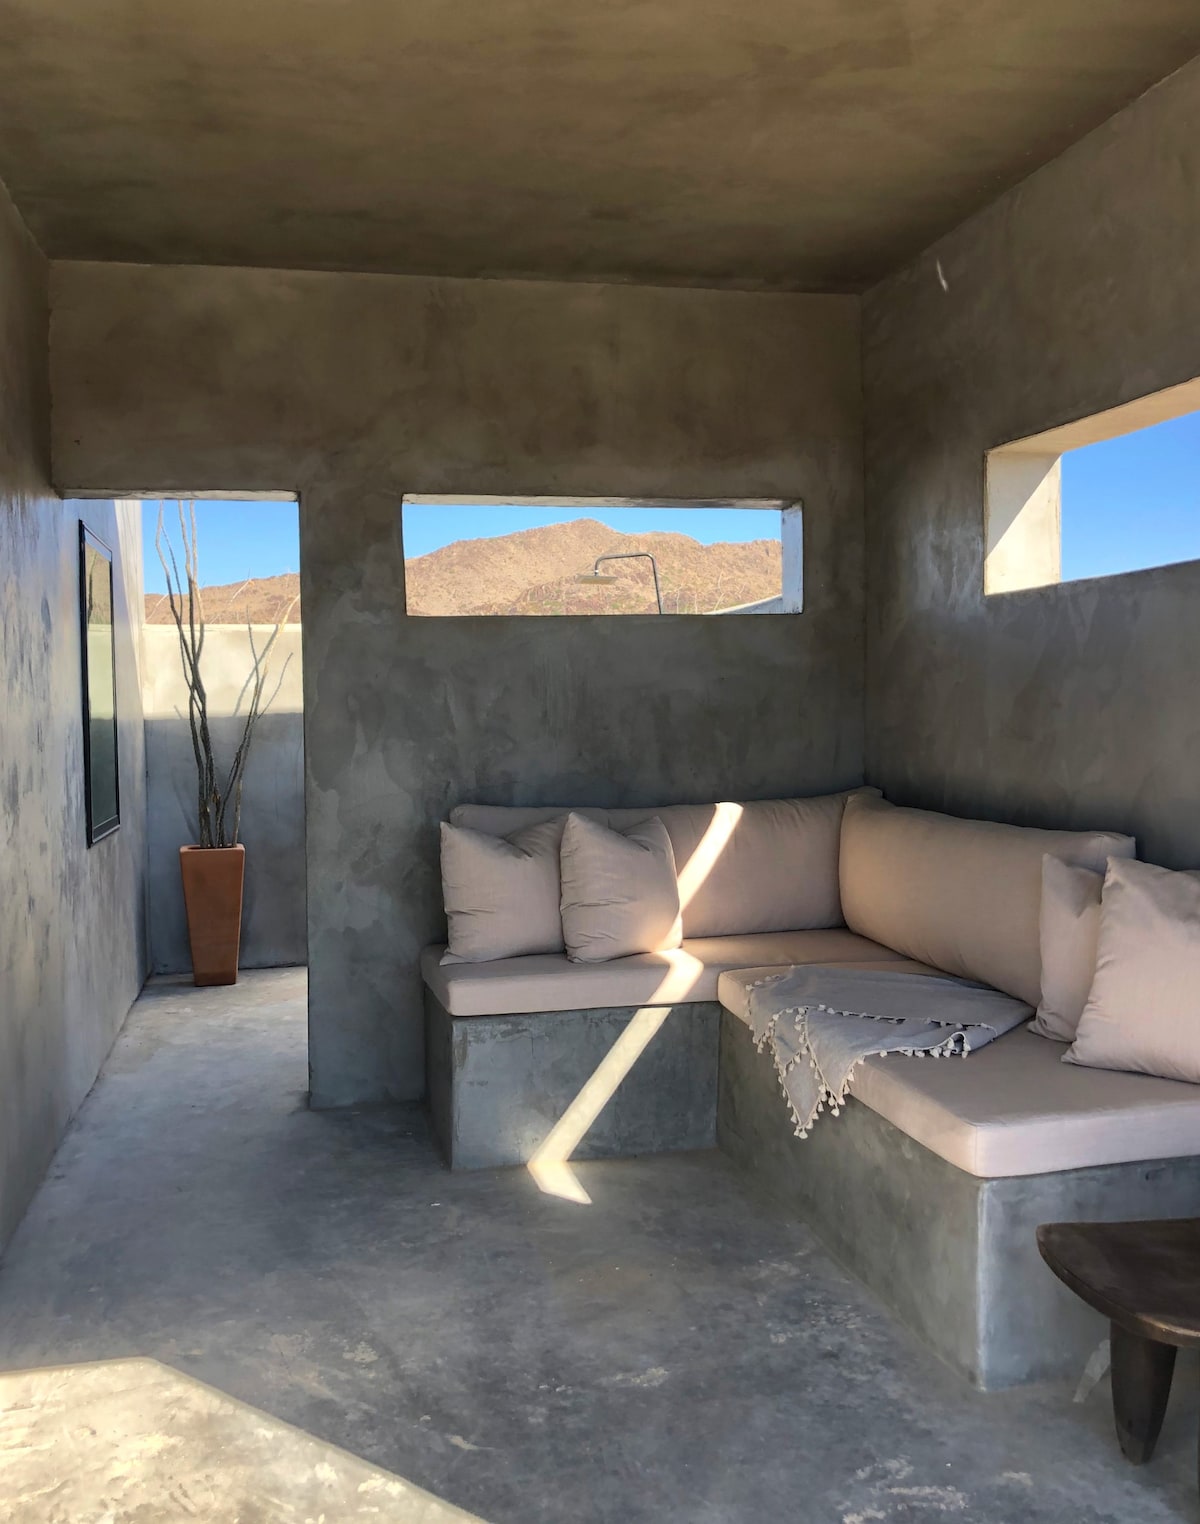 Willow House - No. 1- Terlingua | Big Bend NP